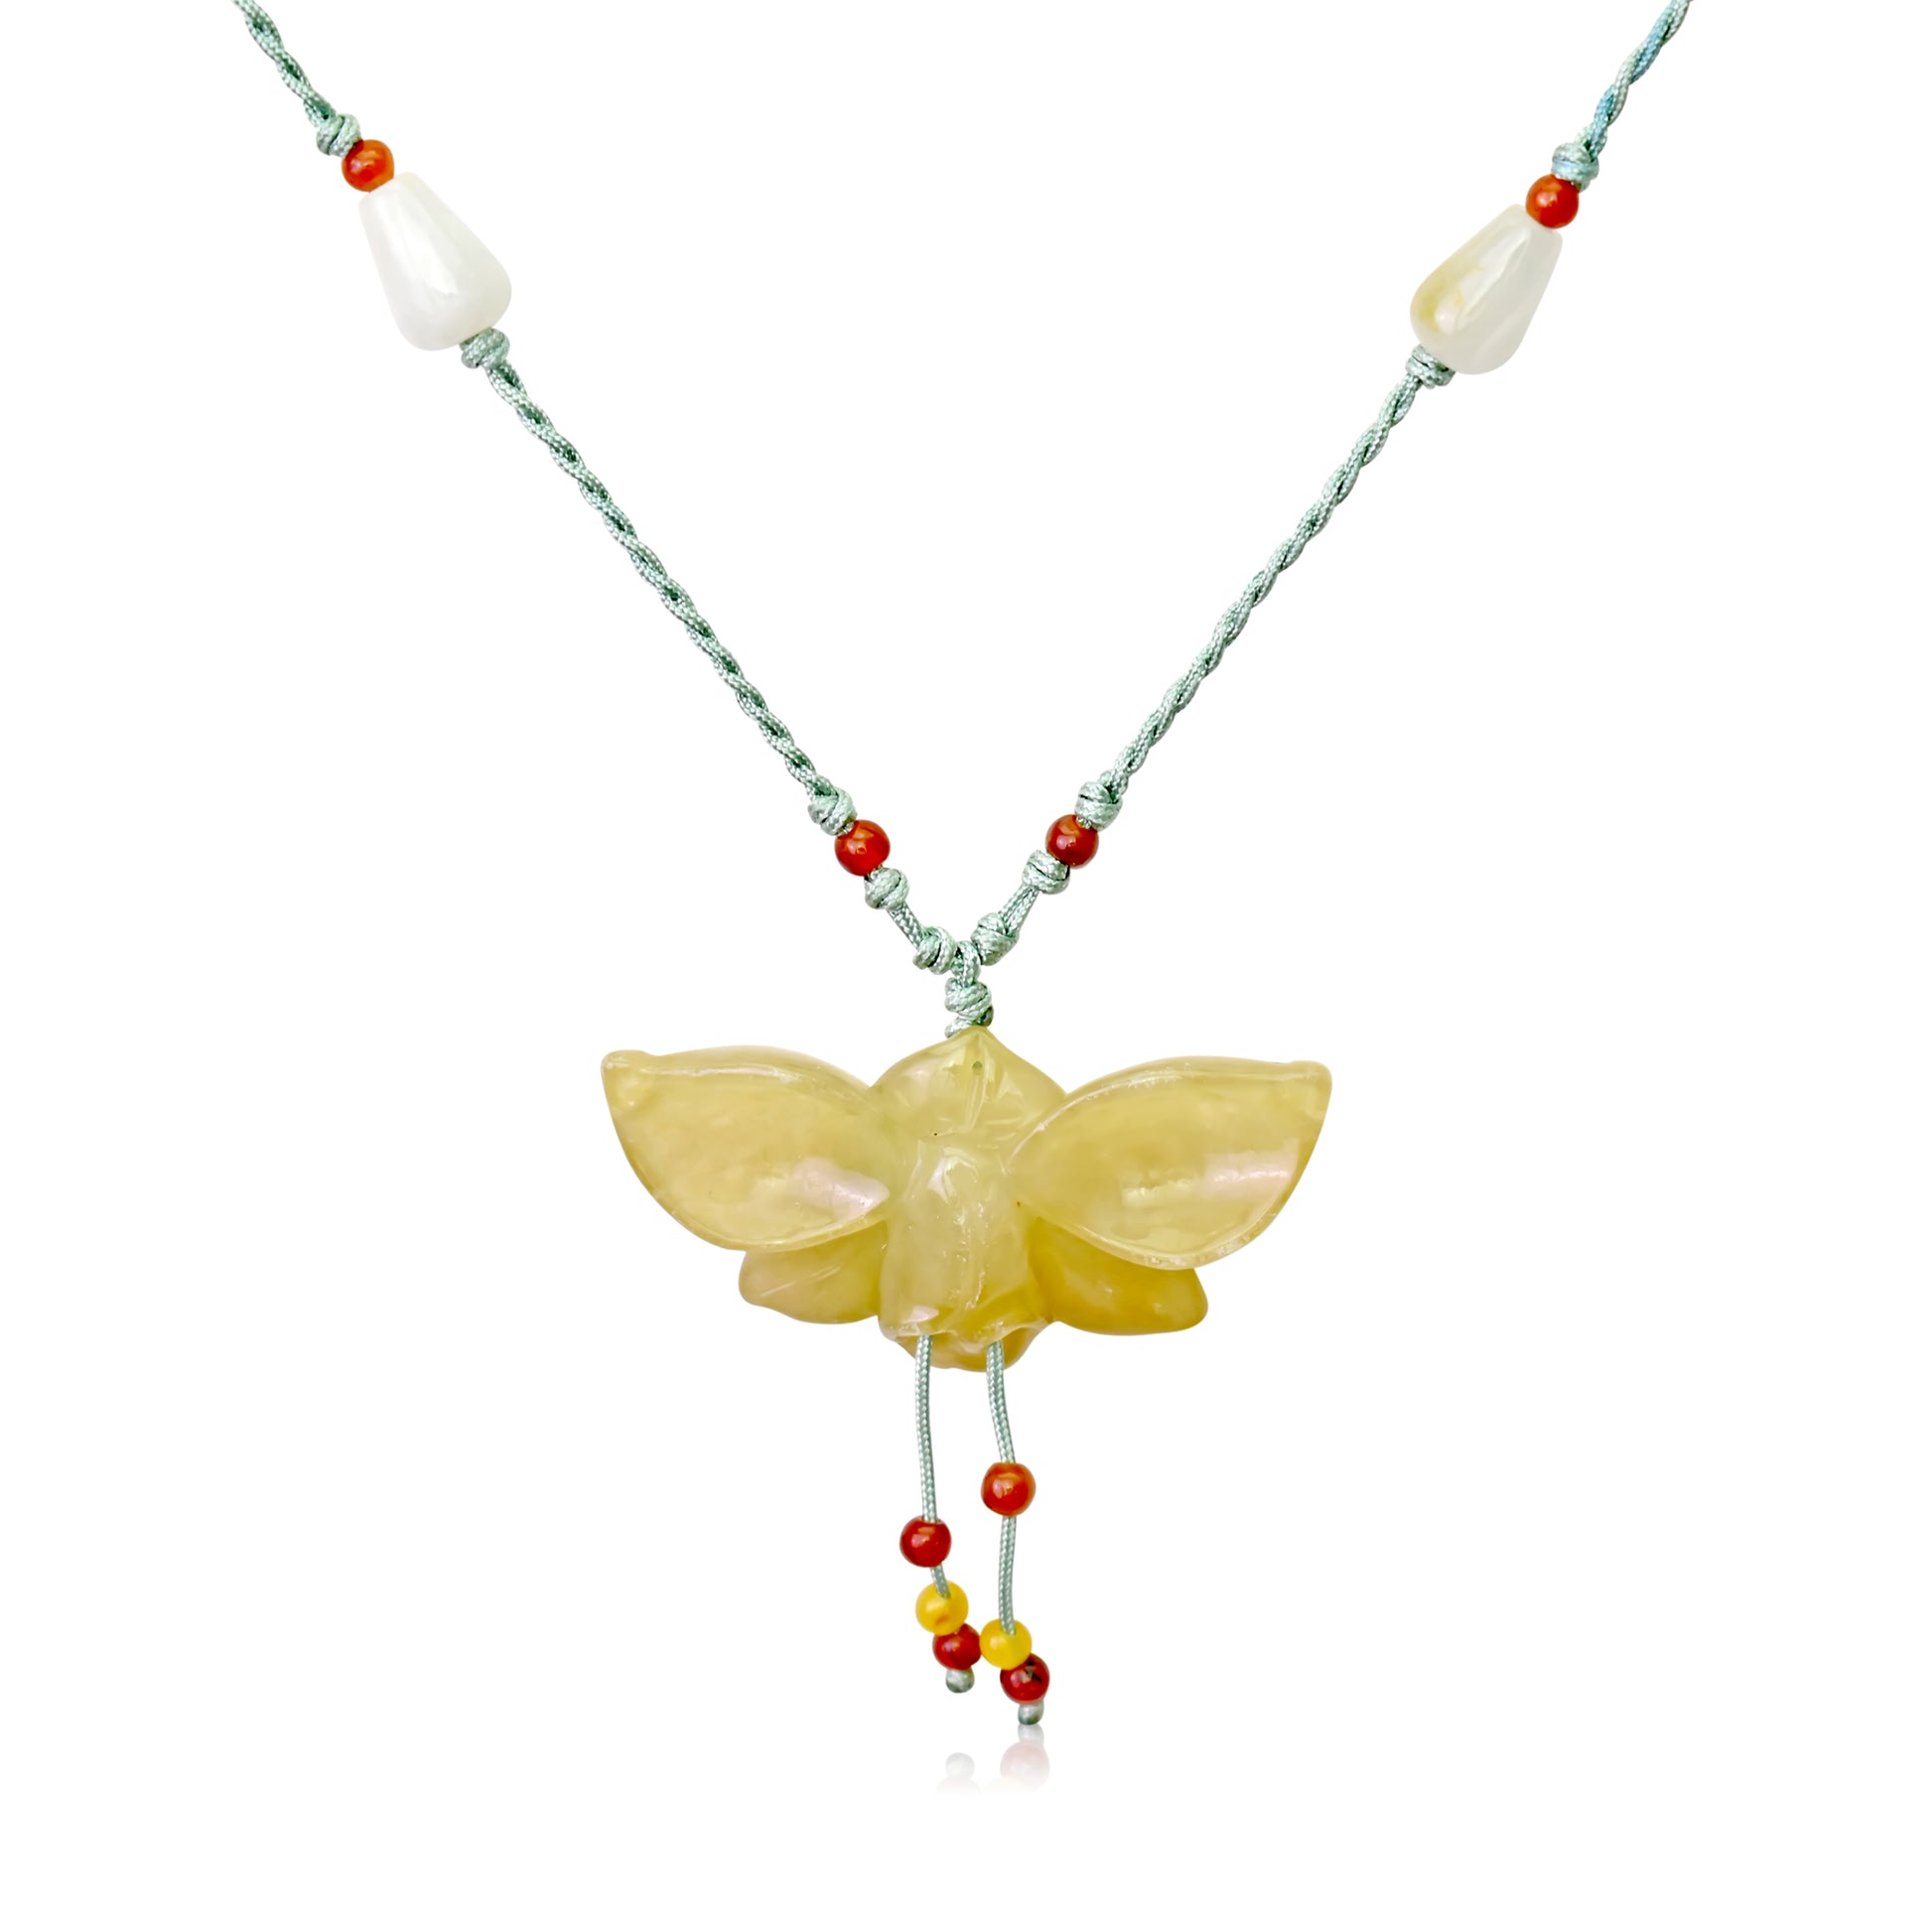 Discover Your Inner Beauty with the Butterfly Orchid Necklace